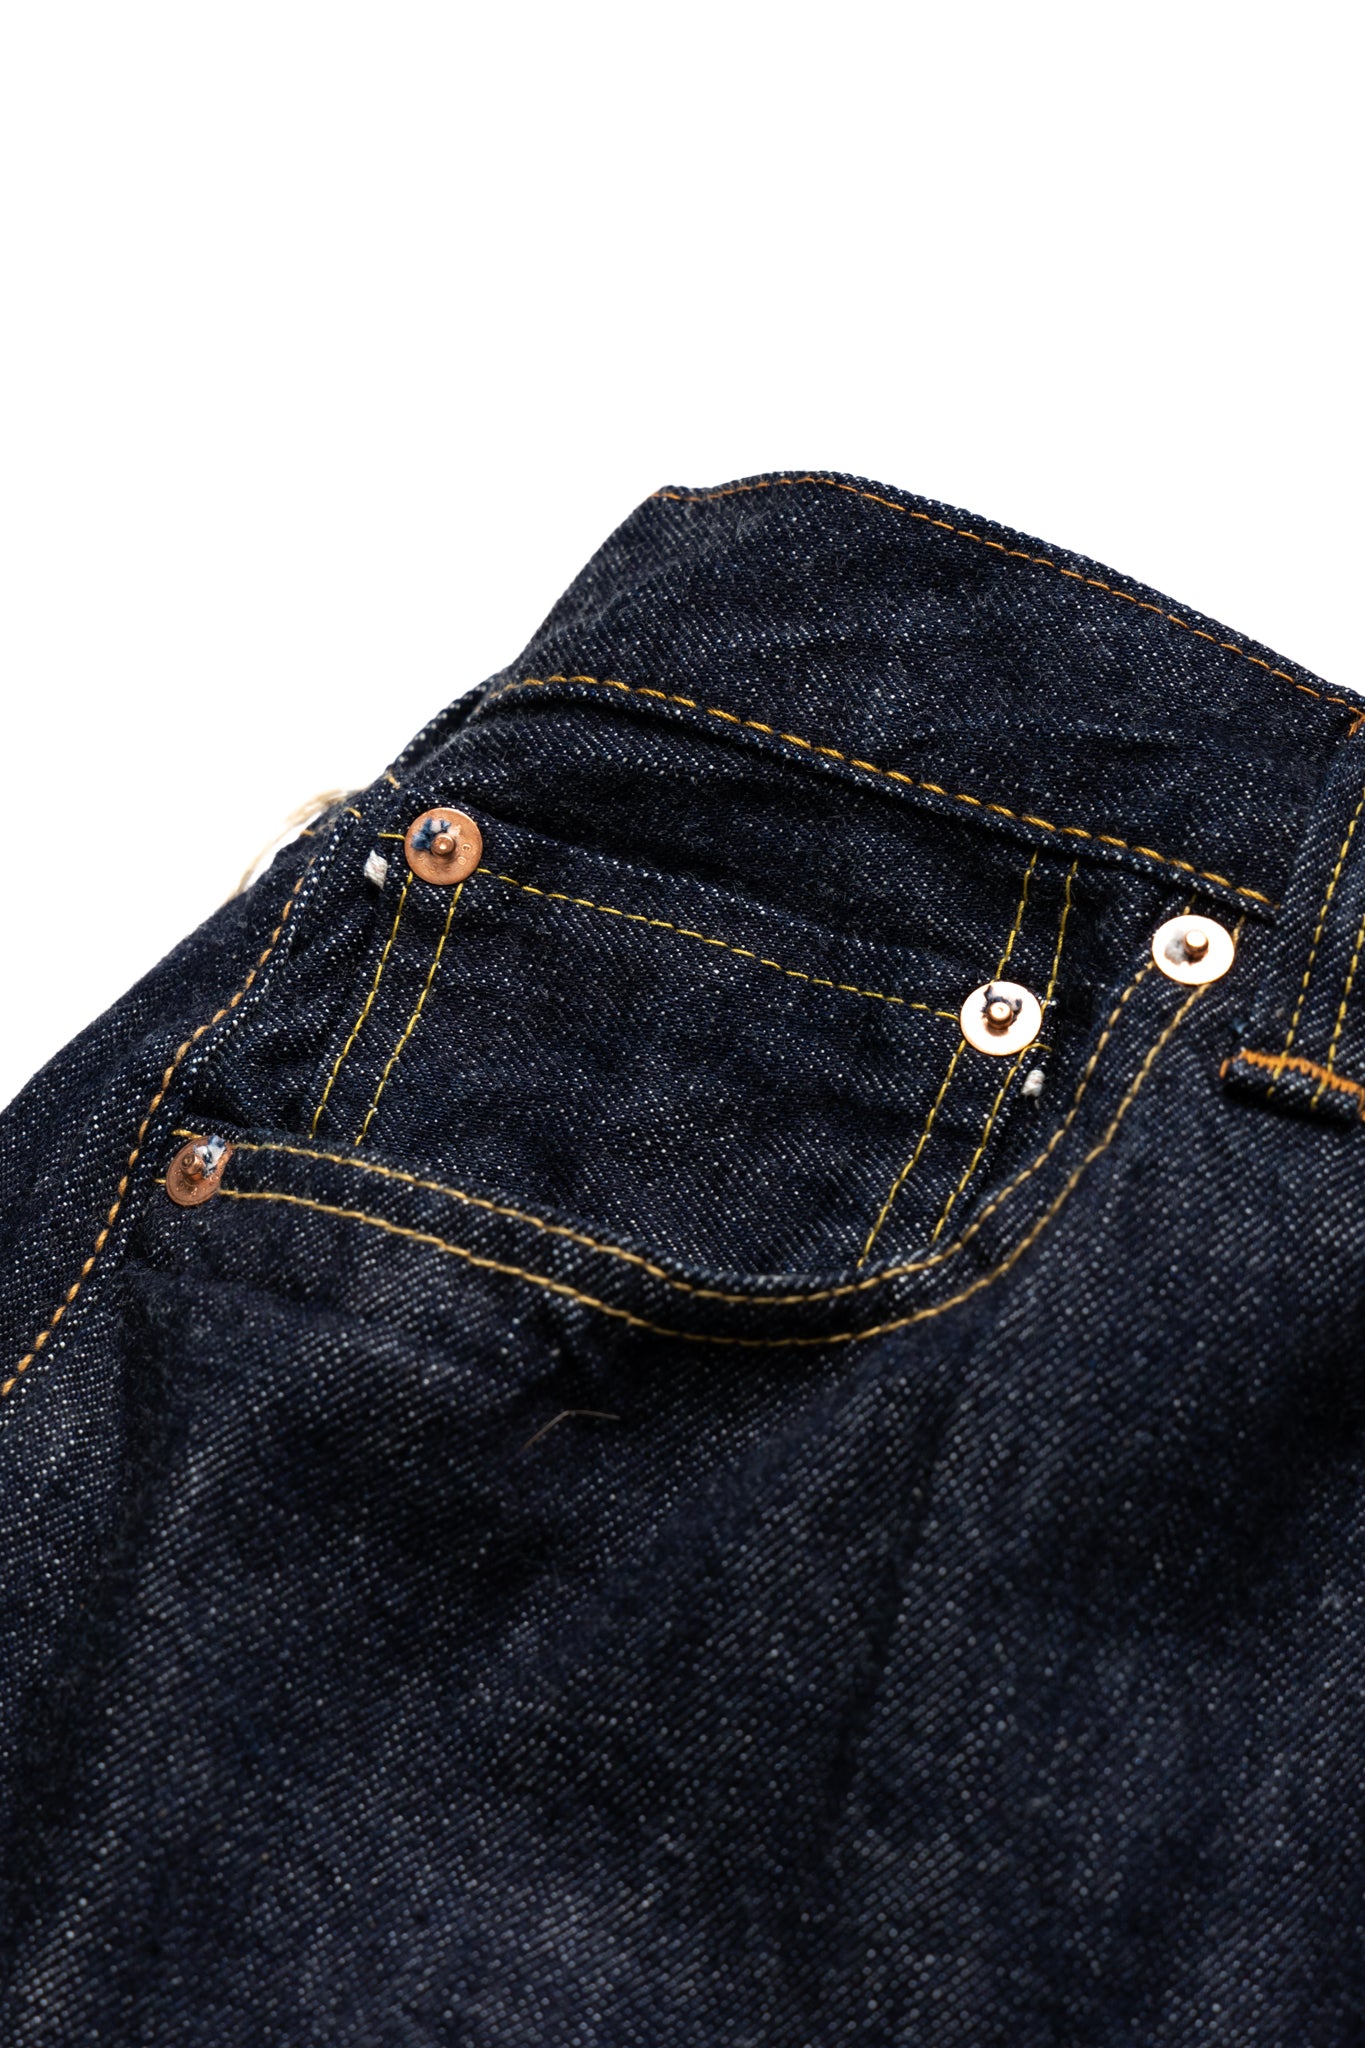 From Full Count is a genuine Indigo Wide Straight Fit. 13.75oz. Fullcount Original Japanese Selvedge Denim. One Wash. 100% Zimbabwe Cotton. Goat Skin Leather Patch. 100% Cotton. Thread Sewing Construction Made In Japan 